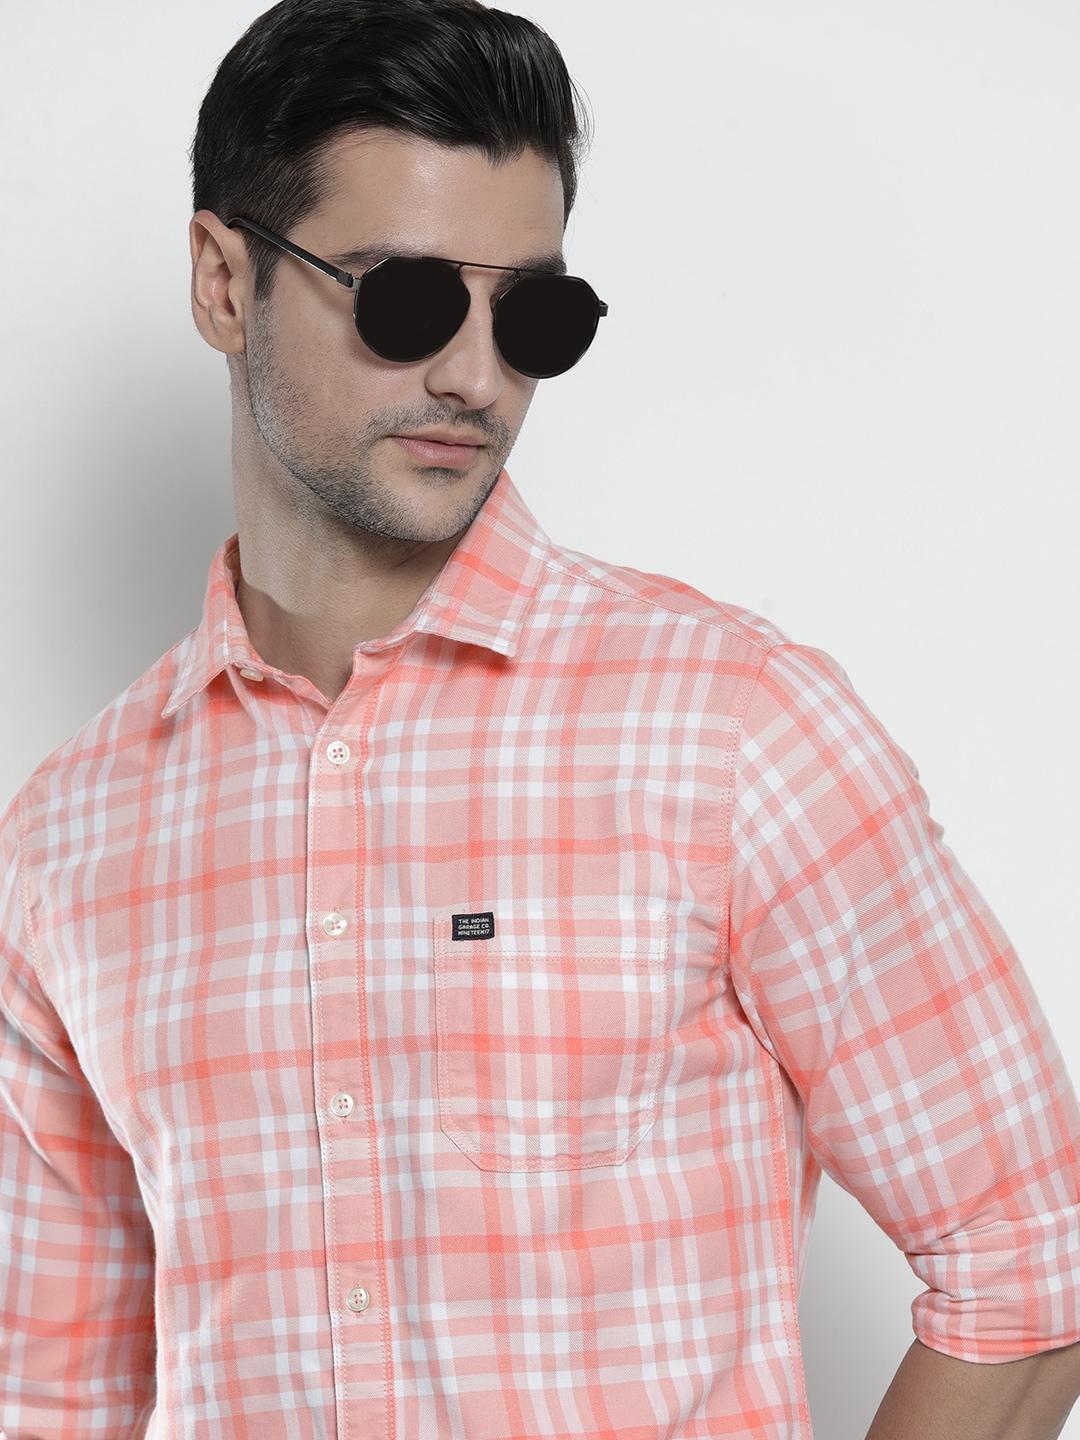 The Indian Garage Co Men Peach-Coloured & White Comfort Fit Checked Casual Shirt